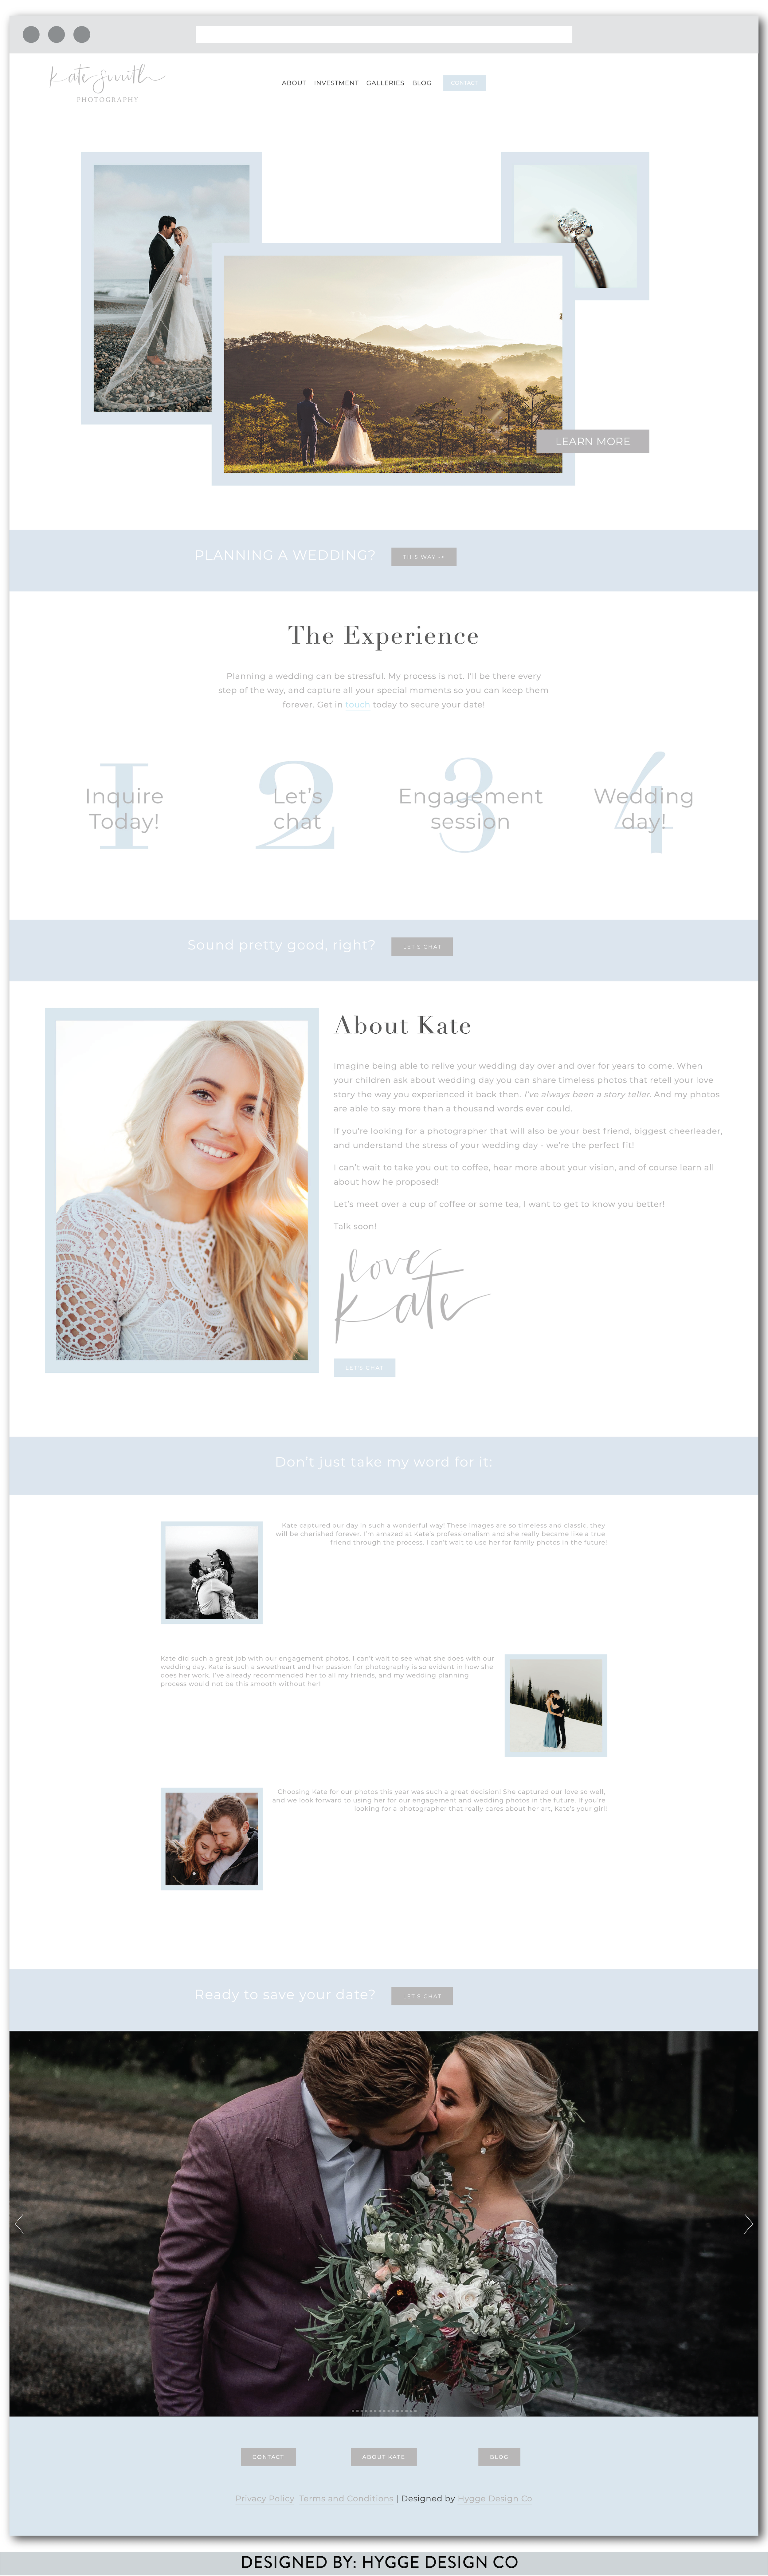 Kate Smith by Hygge Design Co website